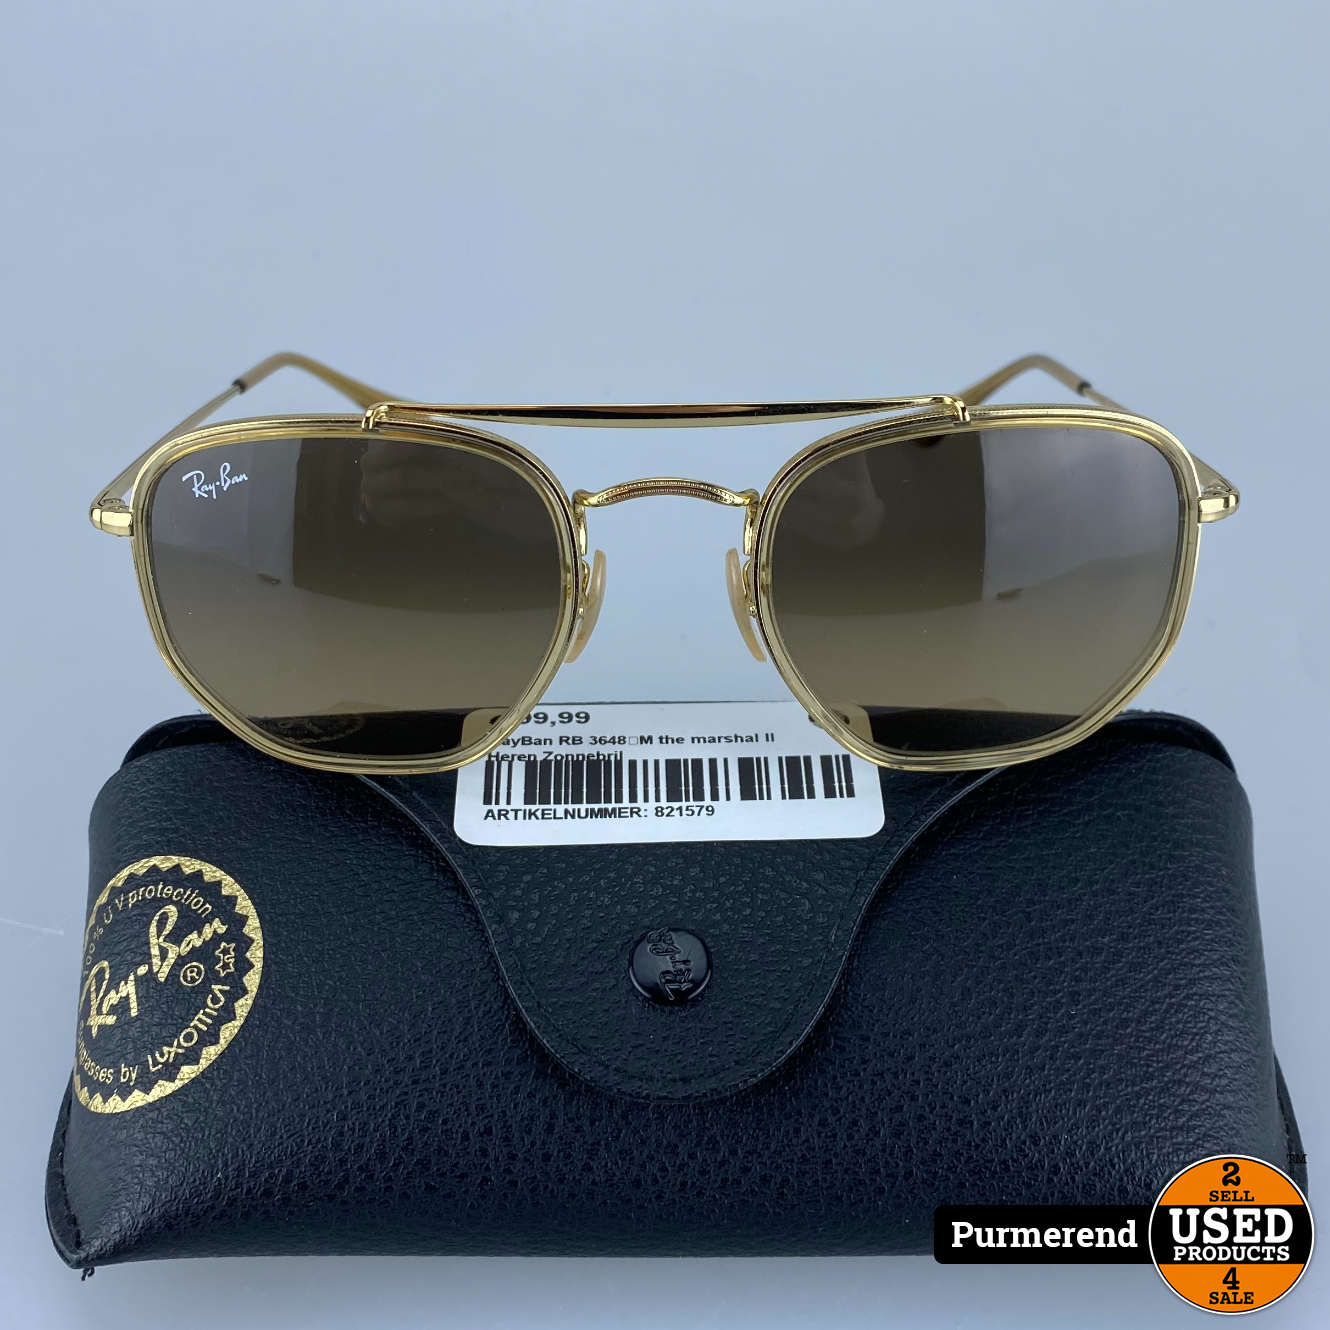 lila Portret Beven RayBan RB 3648‑M the marshal II Heren Zonnebril - Used Products Purmerend